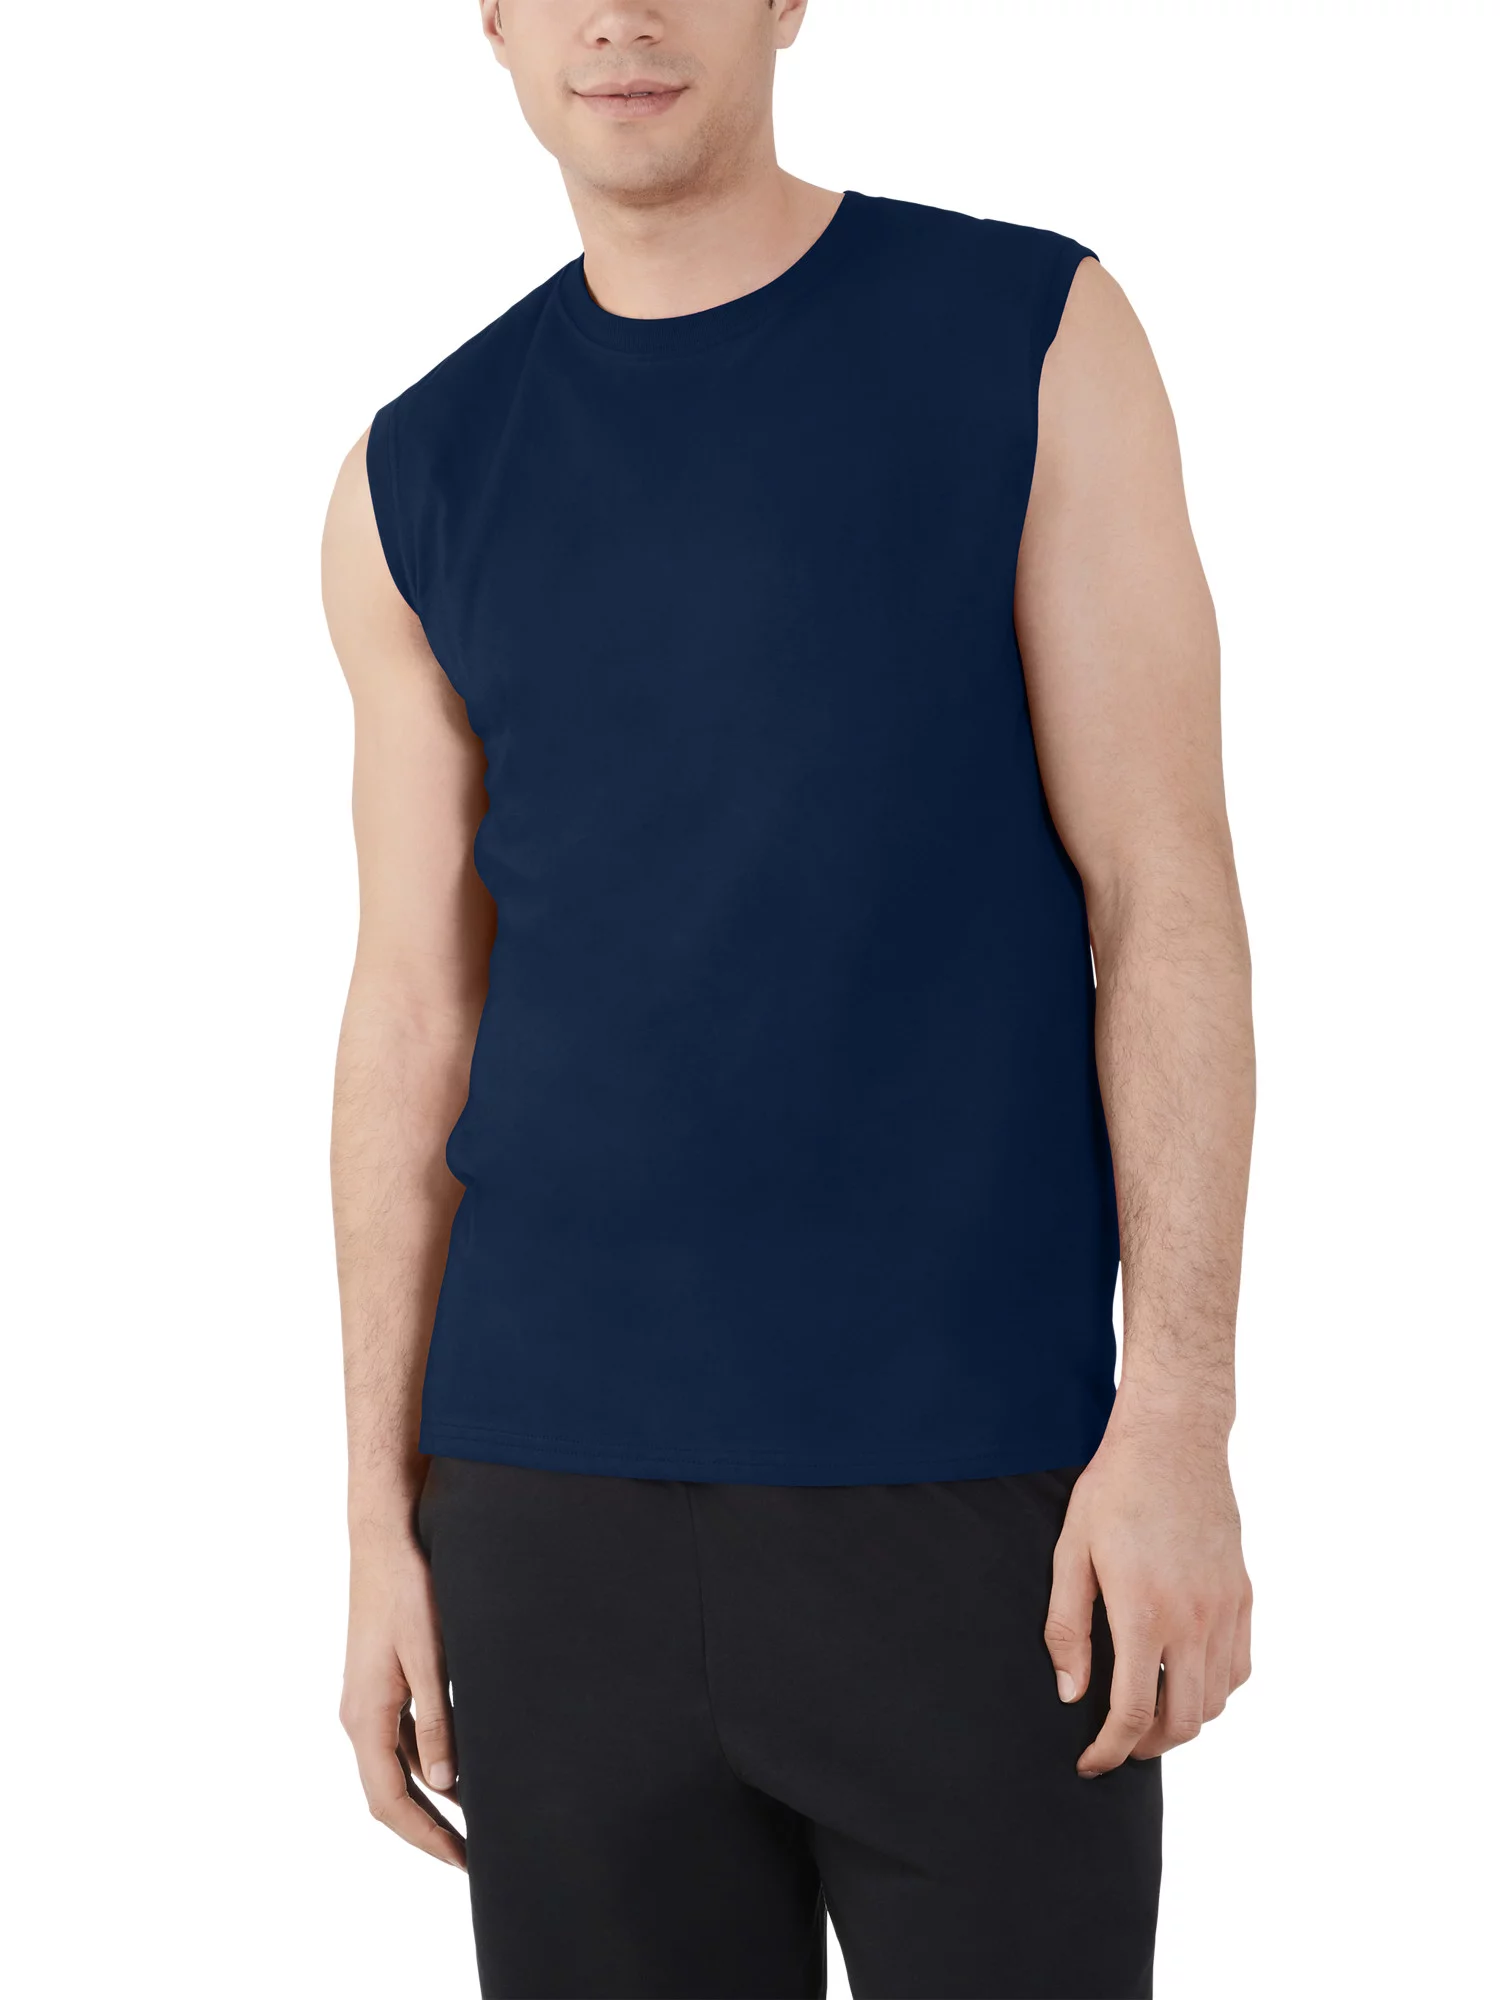 Fruit of the Loom Men's and Big Men's Dual Defense UPF Muscle Shirt, up to Size 4X